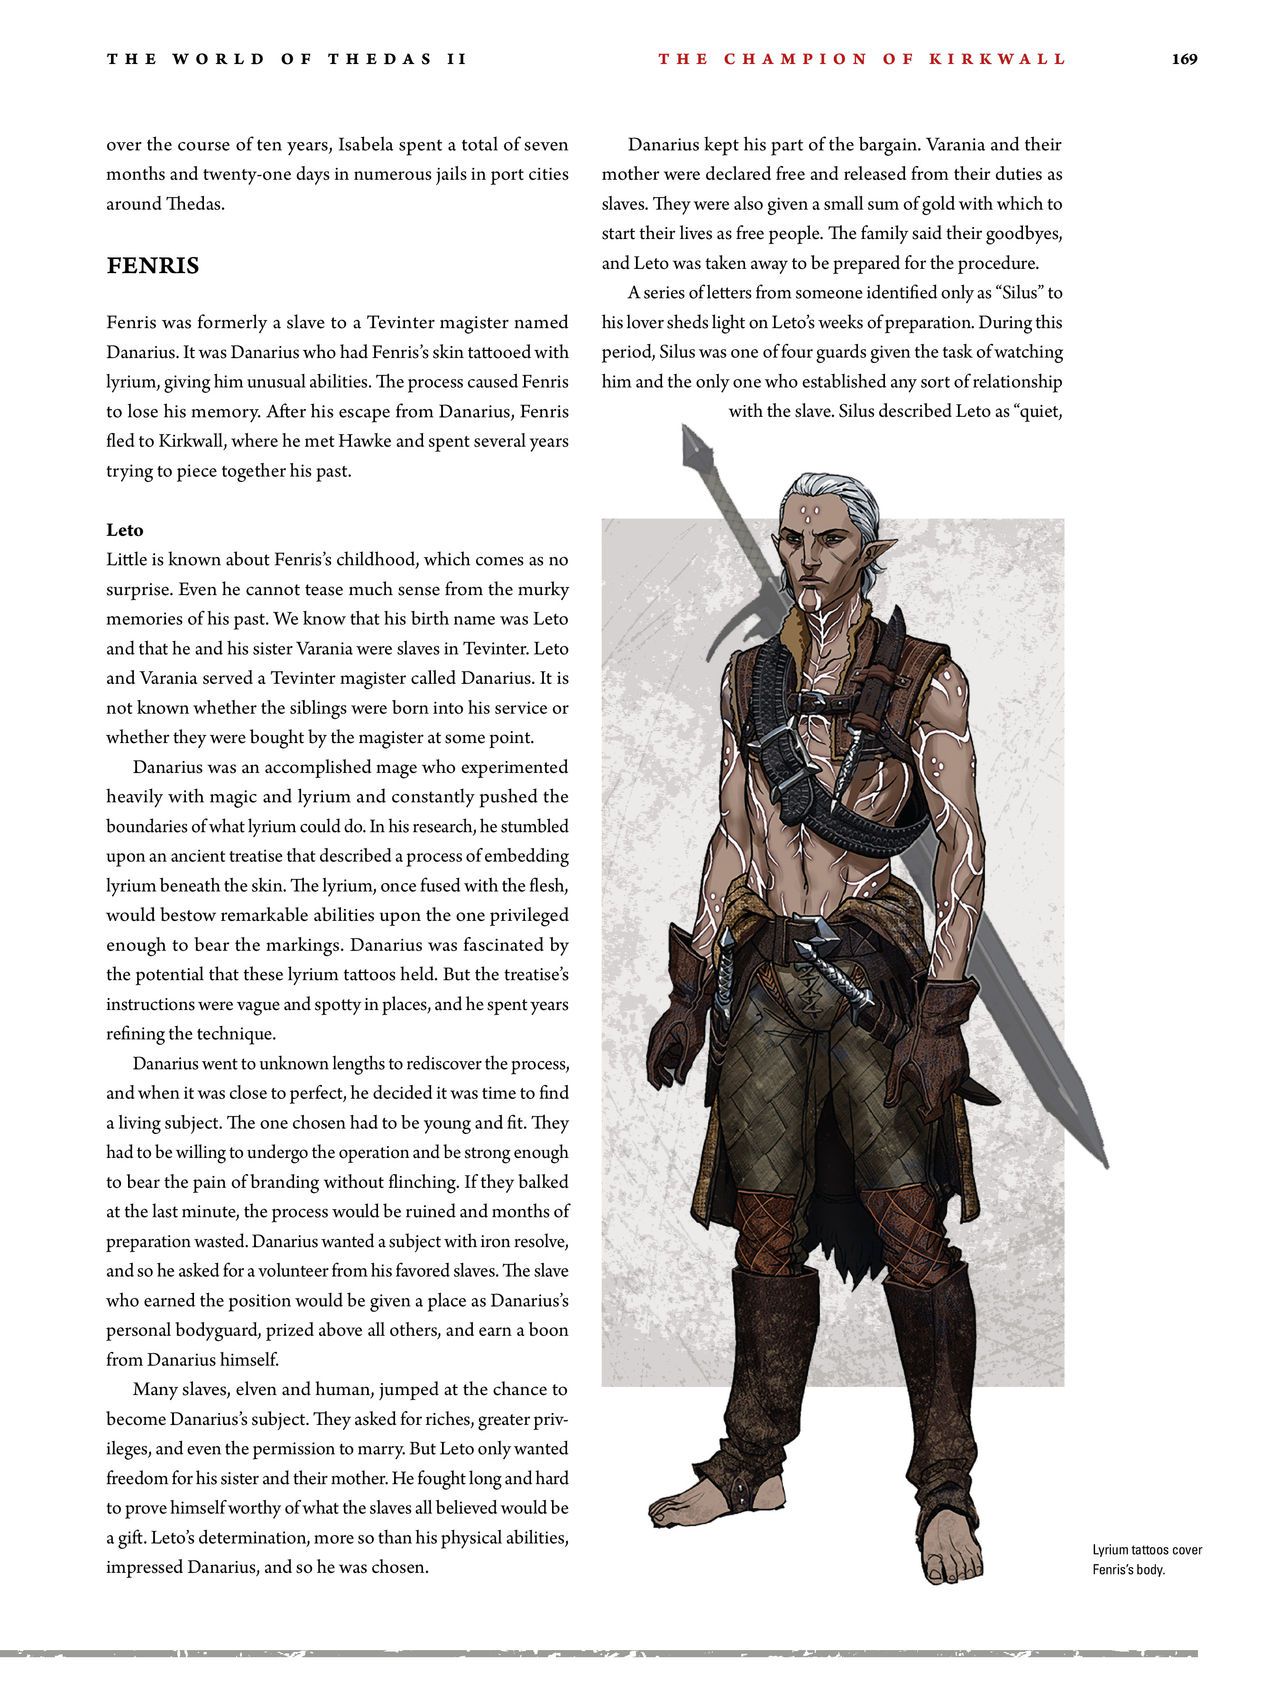 Dragon Age - The World of Thedas v02 164